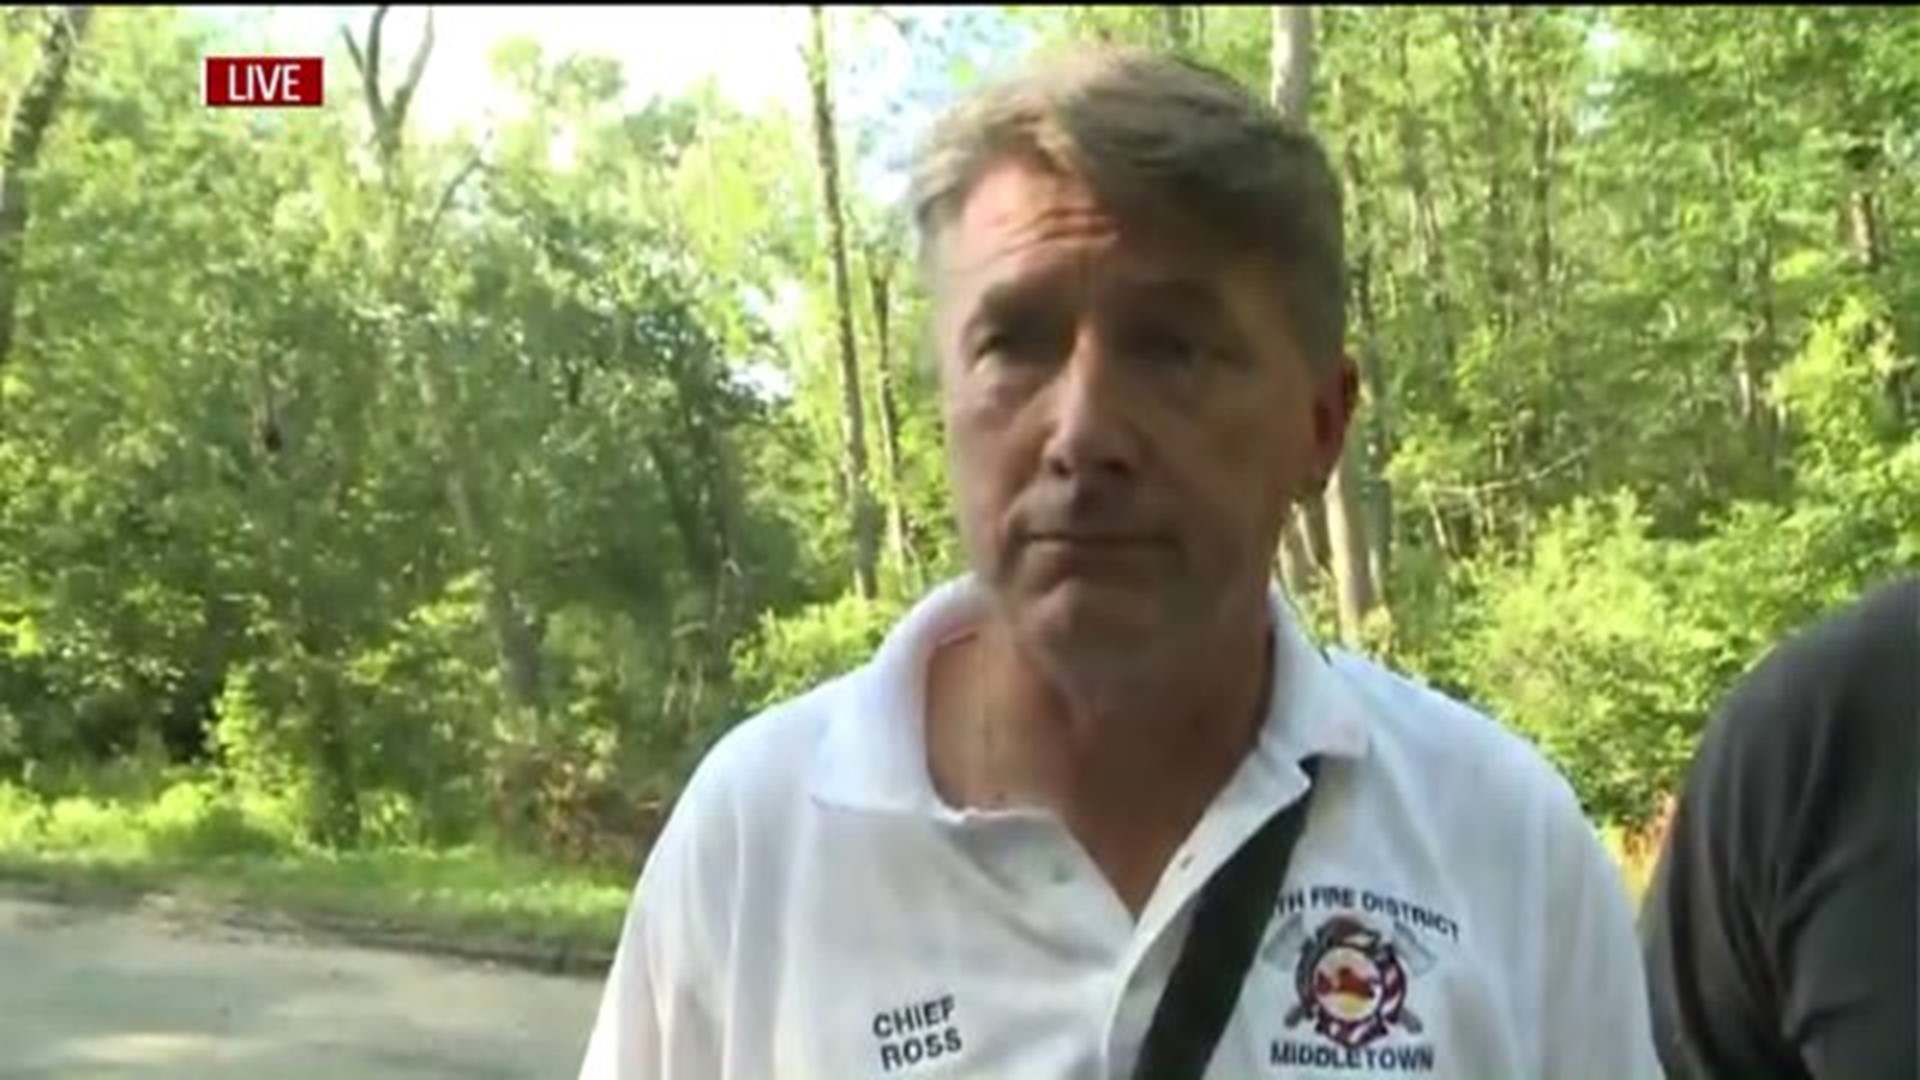 Fire chief in Middletown discusses difficult recovery process after drowning